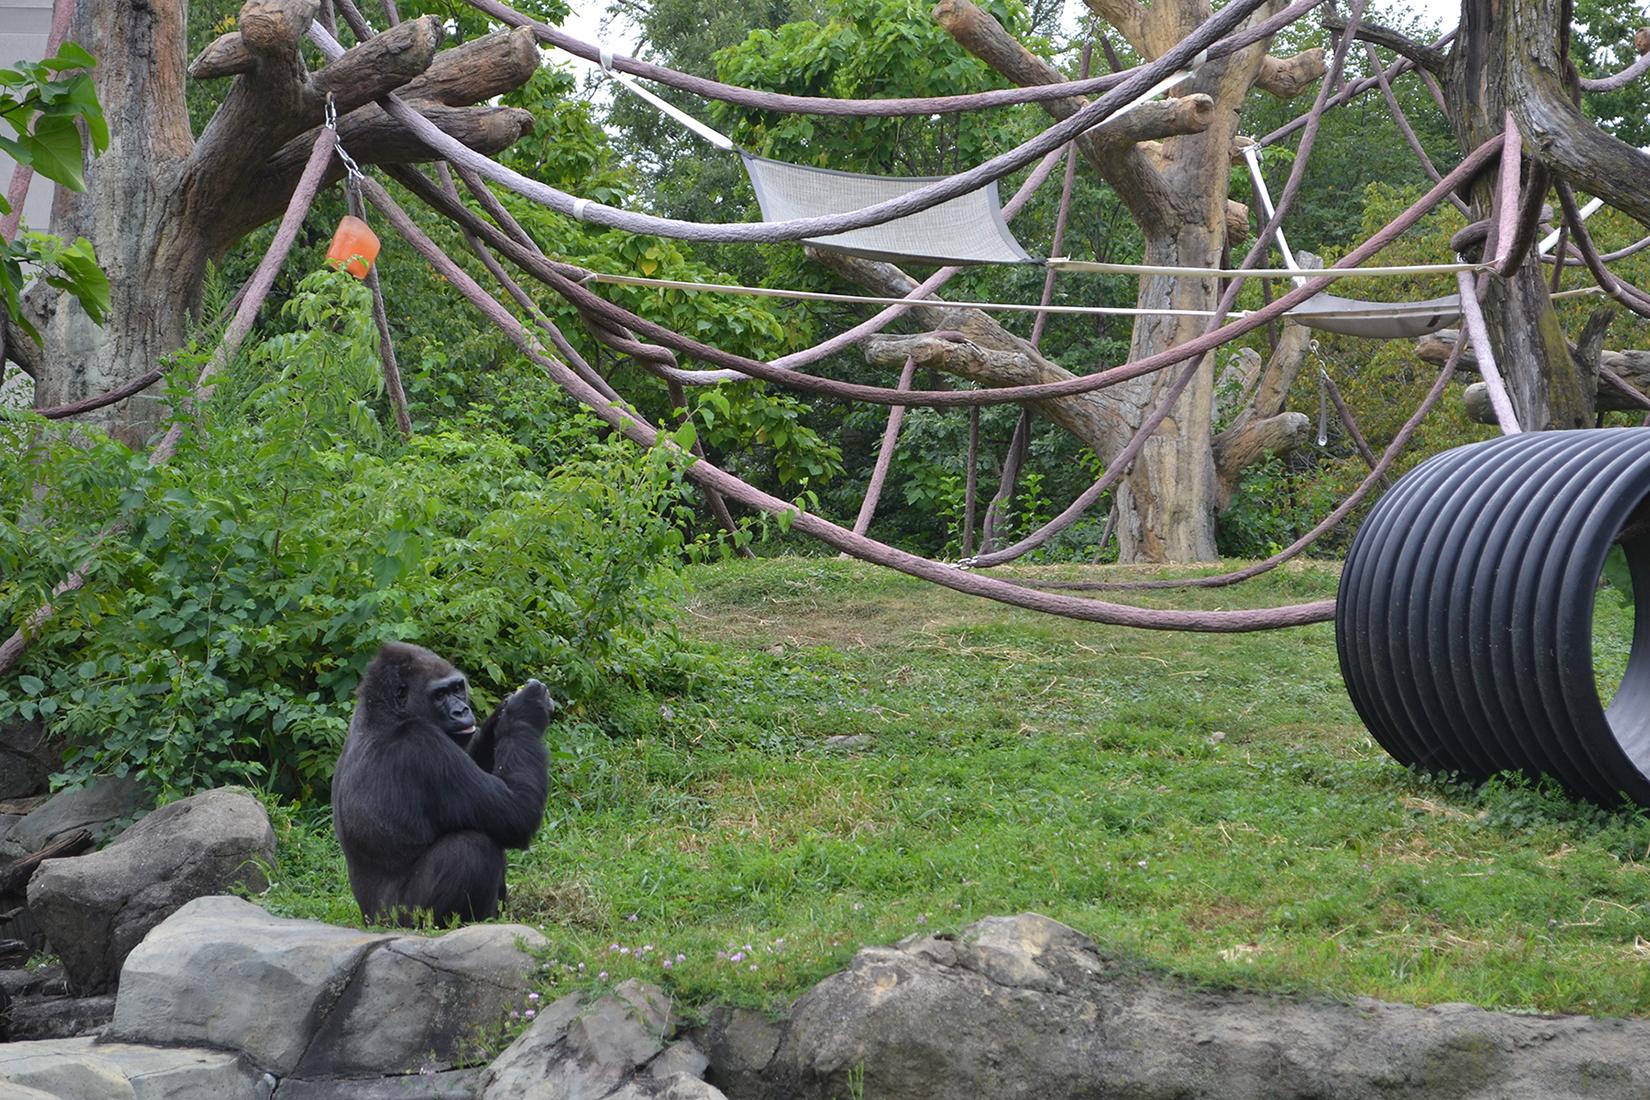 Gorillas were among the animals monitored by scientists at Lincoln Park Zoo during Monday's solar eclipse. (Alex Ruppenthal / Chicago Tonight)